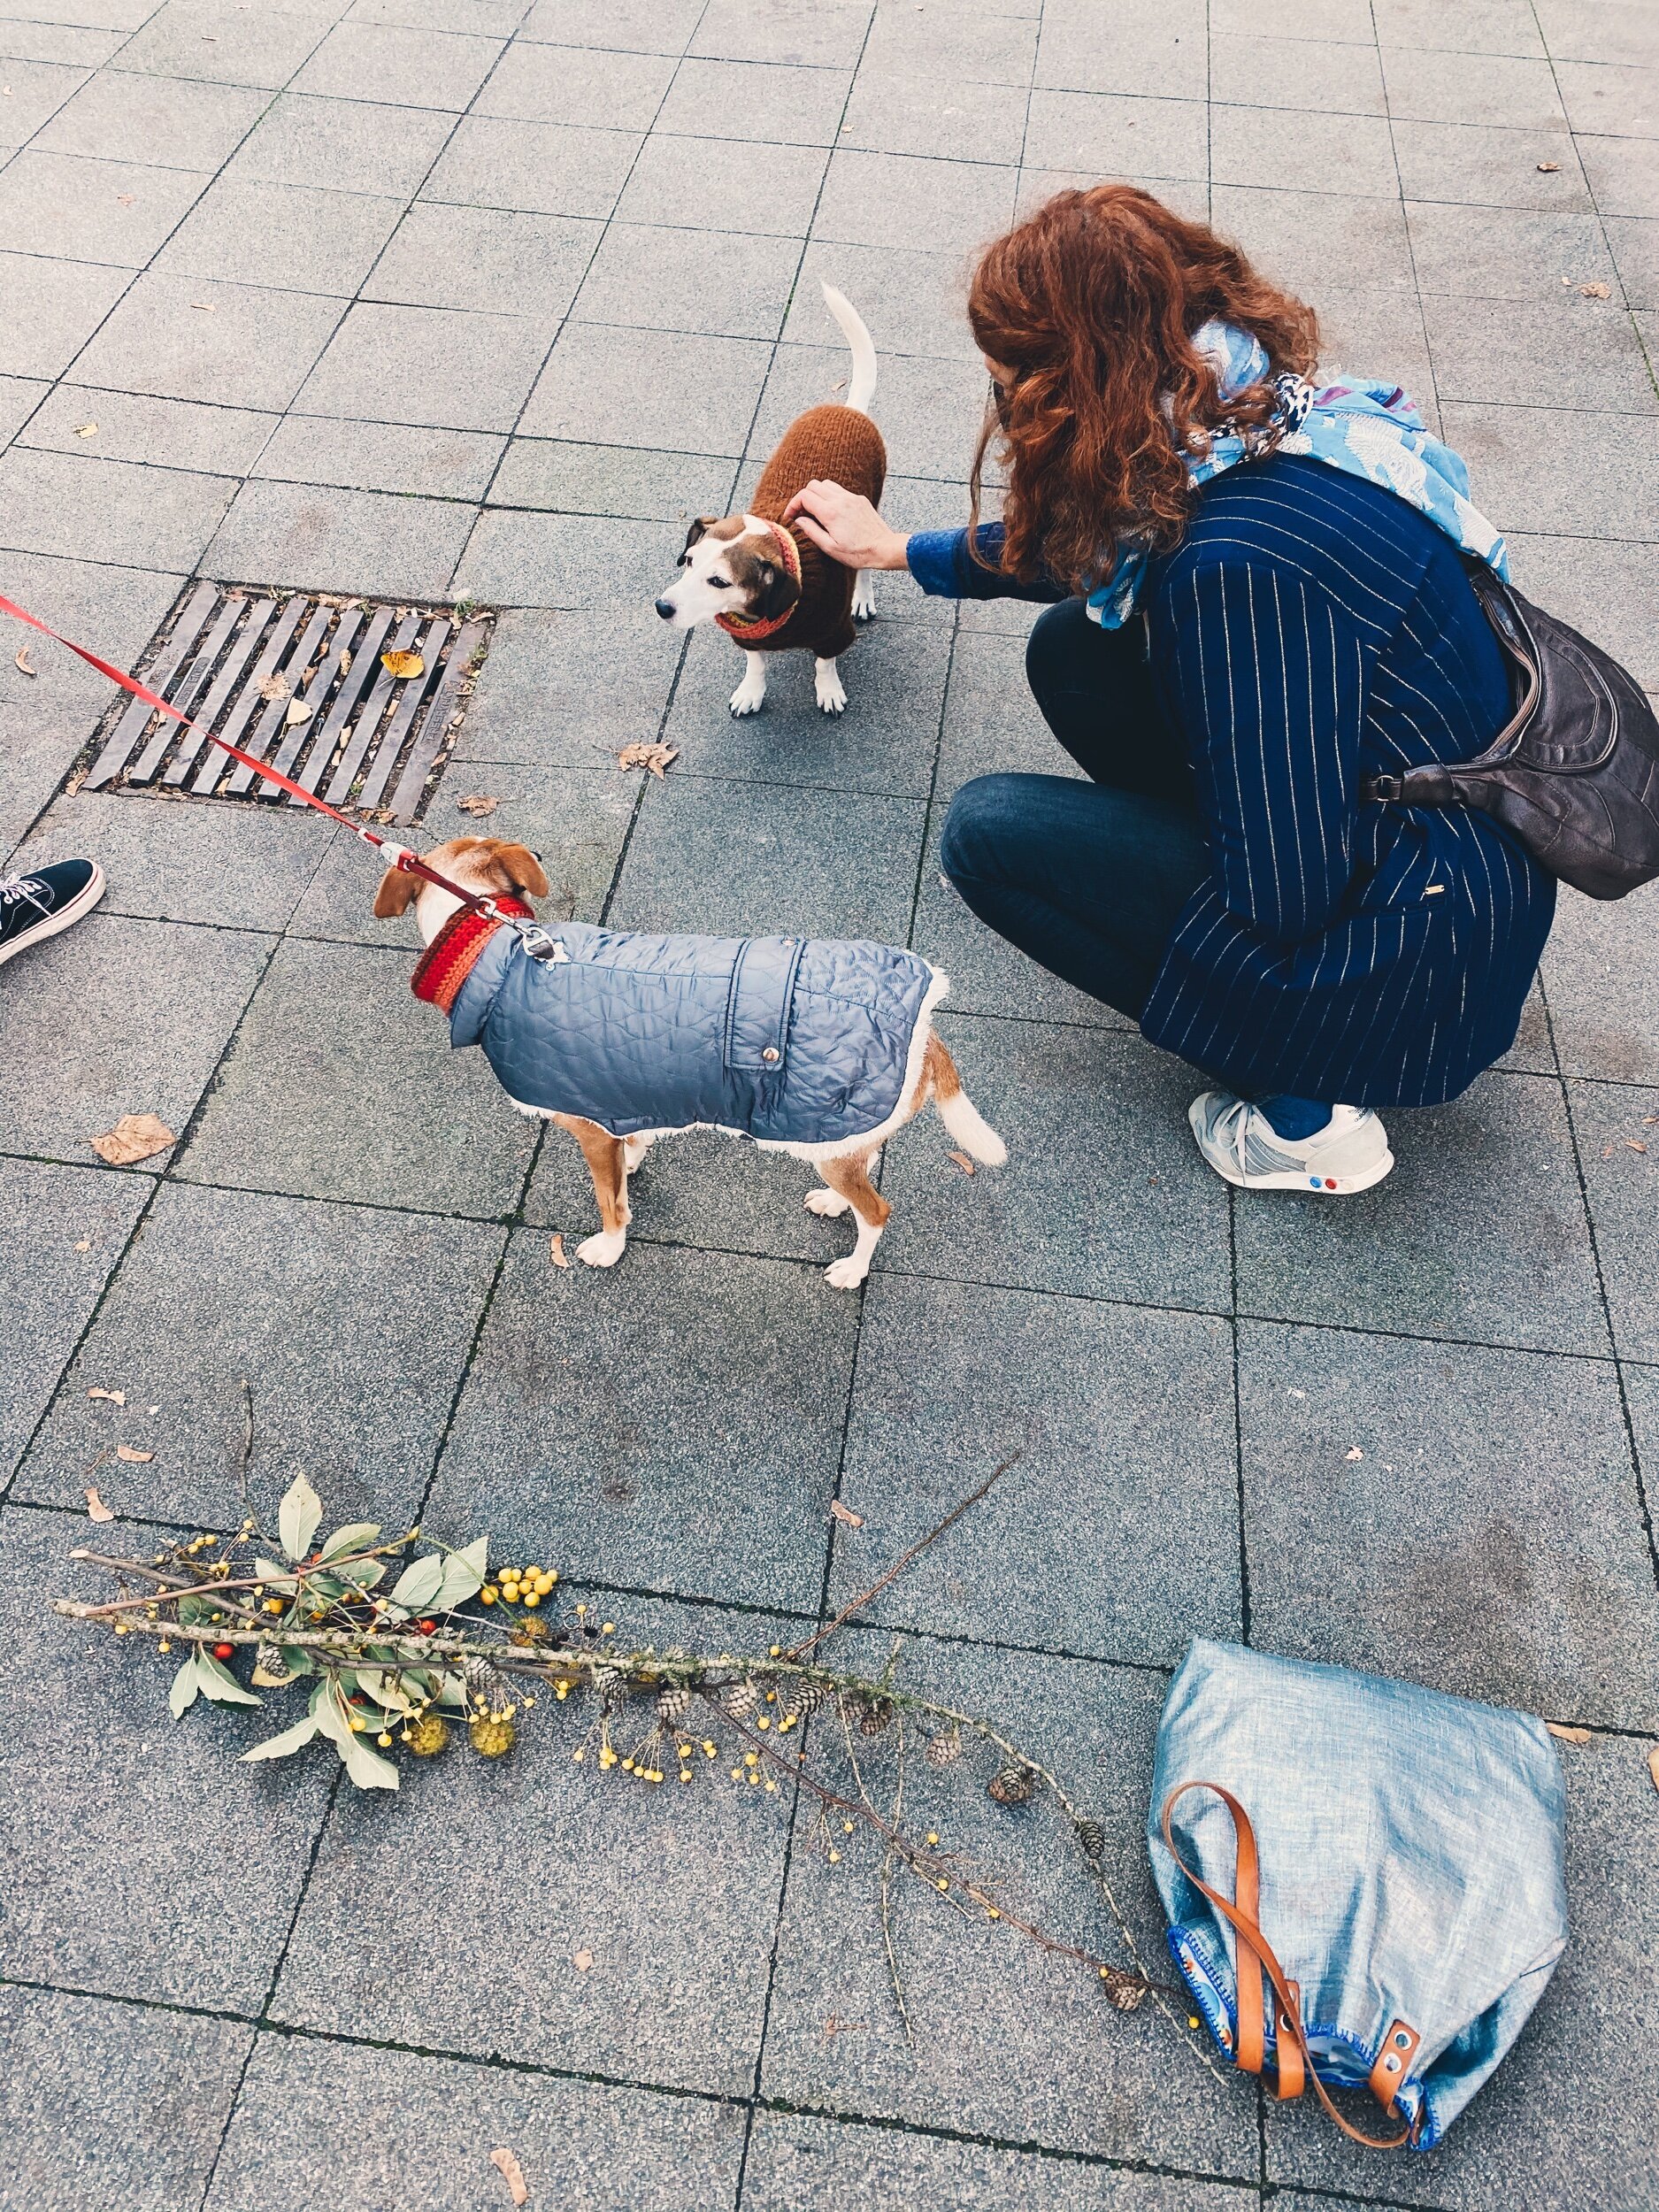 Meeting furry friends with stylish sweaters on